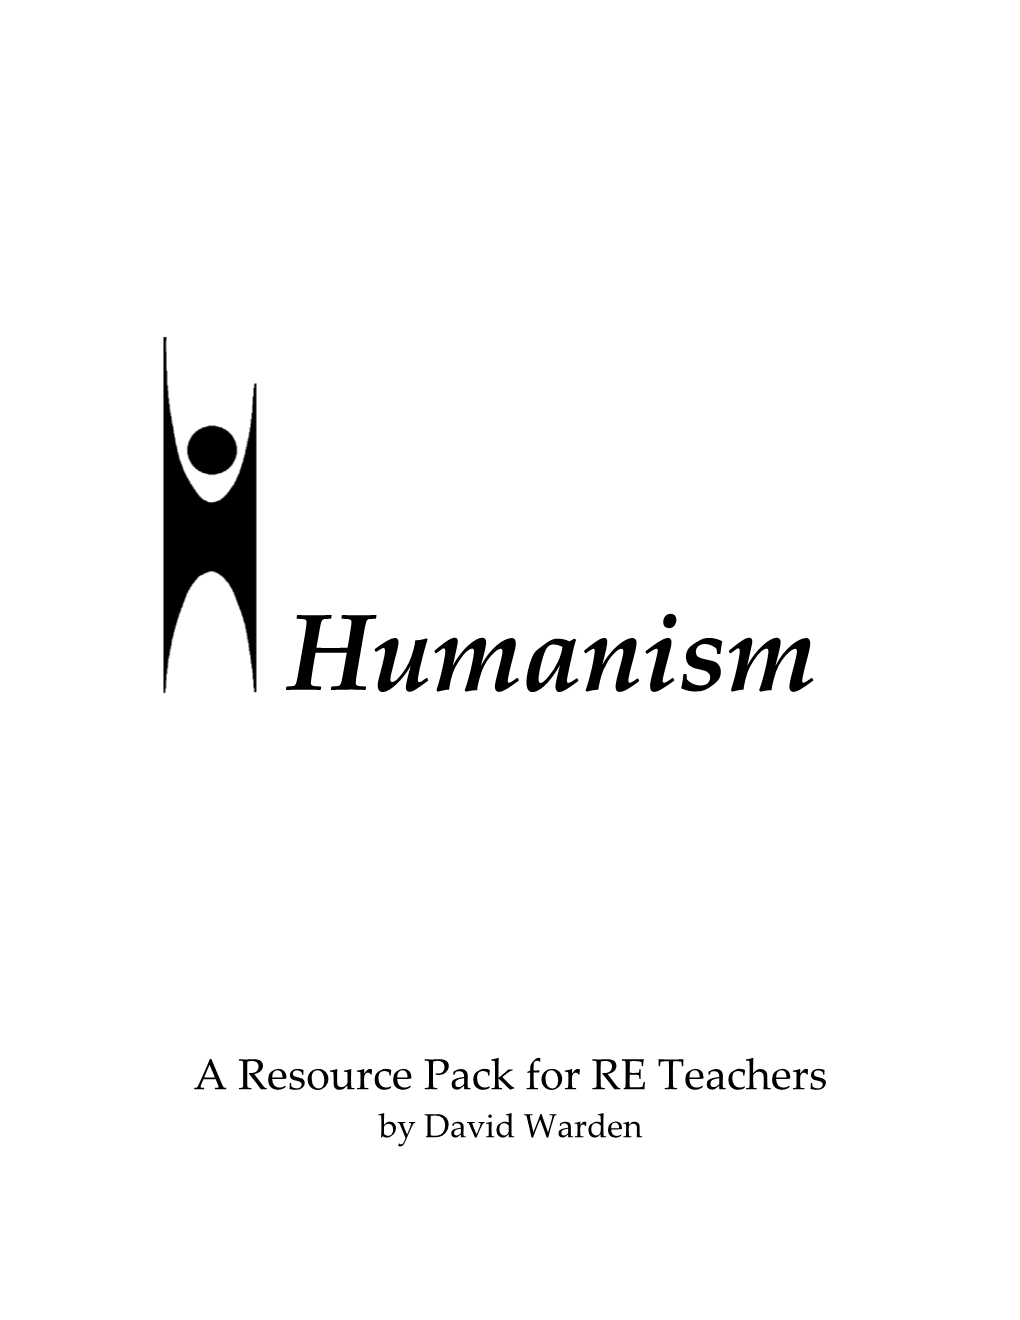 A Resource Pack for RE Teachers